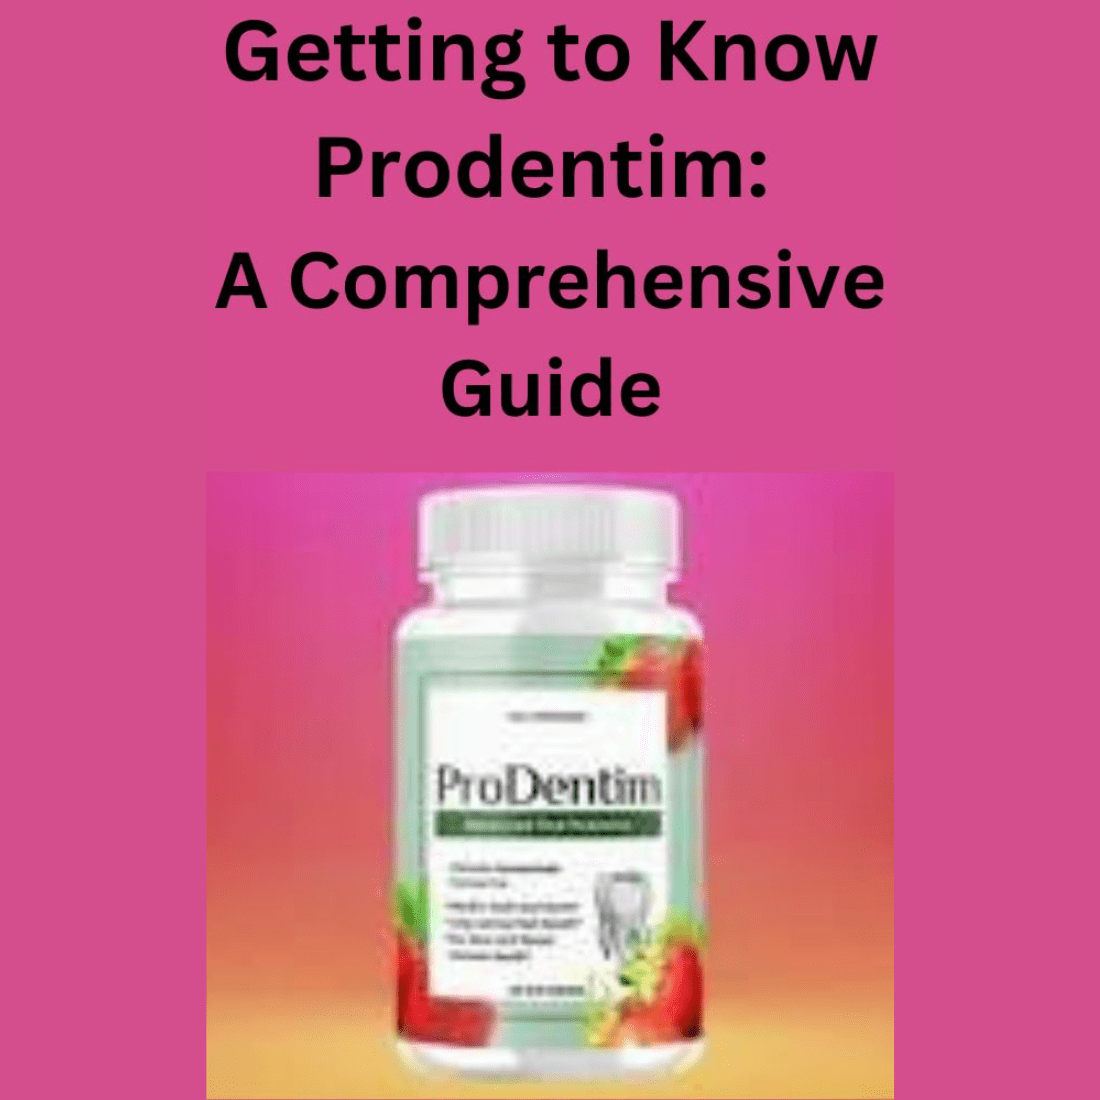 Getting to Know Prodentim: A Comprehensive Guide preview image.